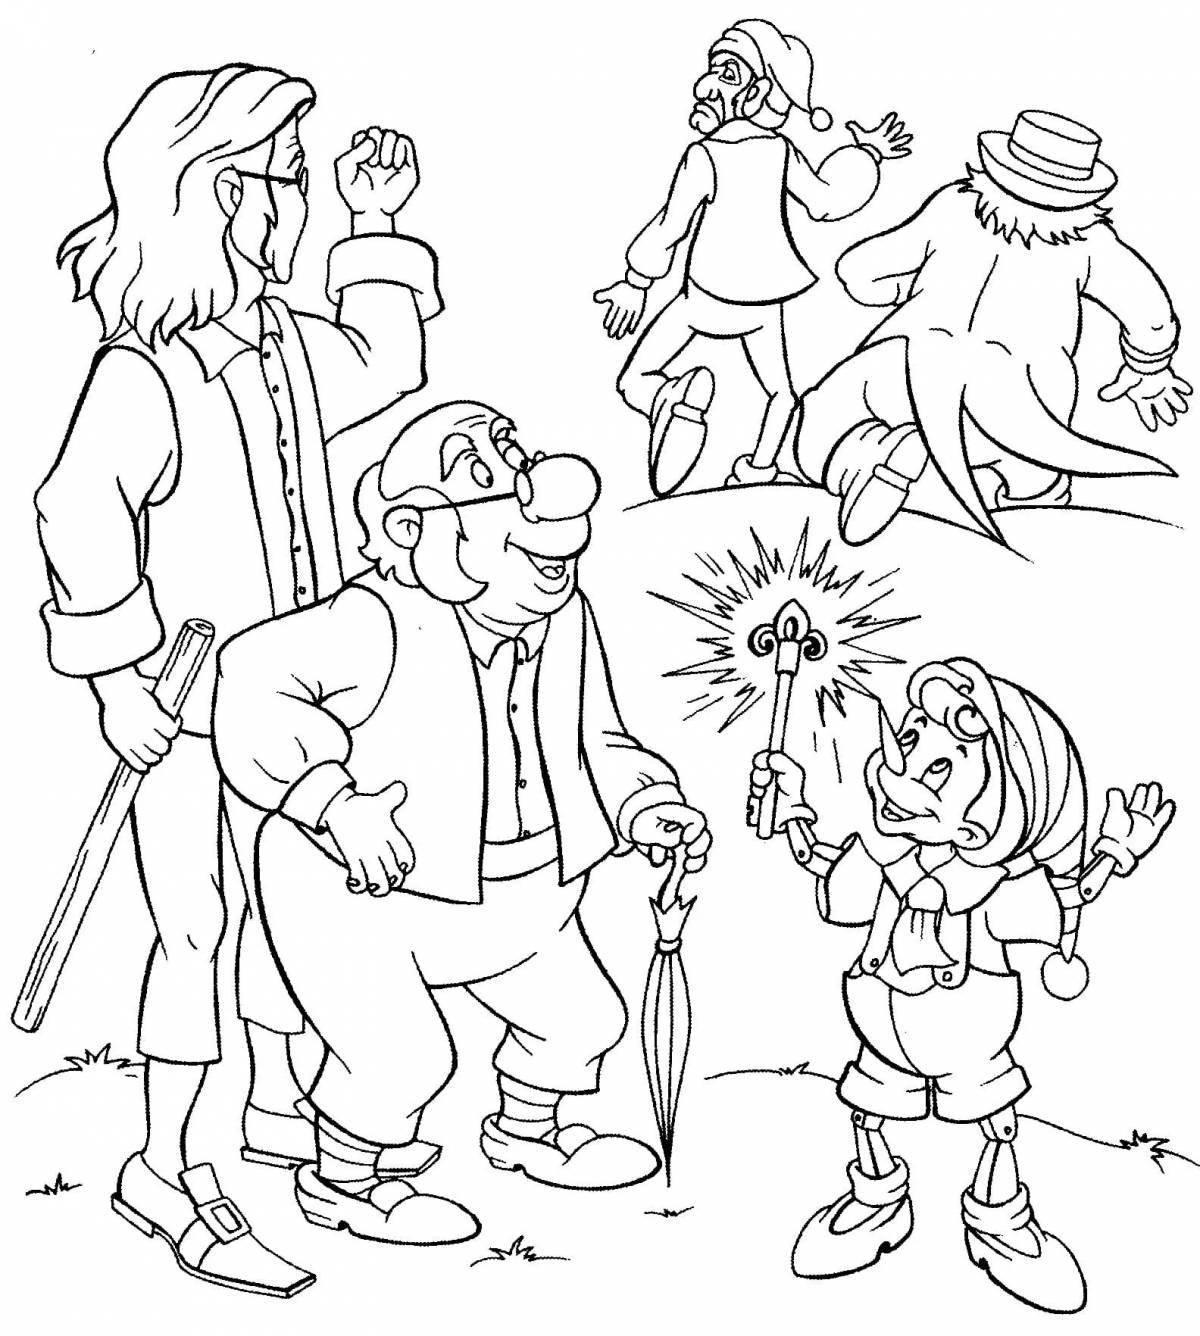 Colorful pinocchio coloring sheet